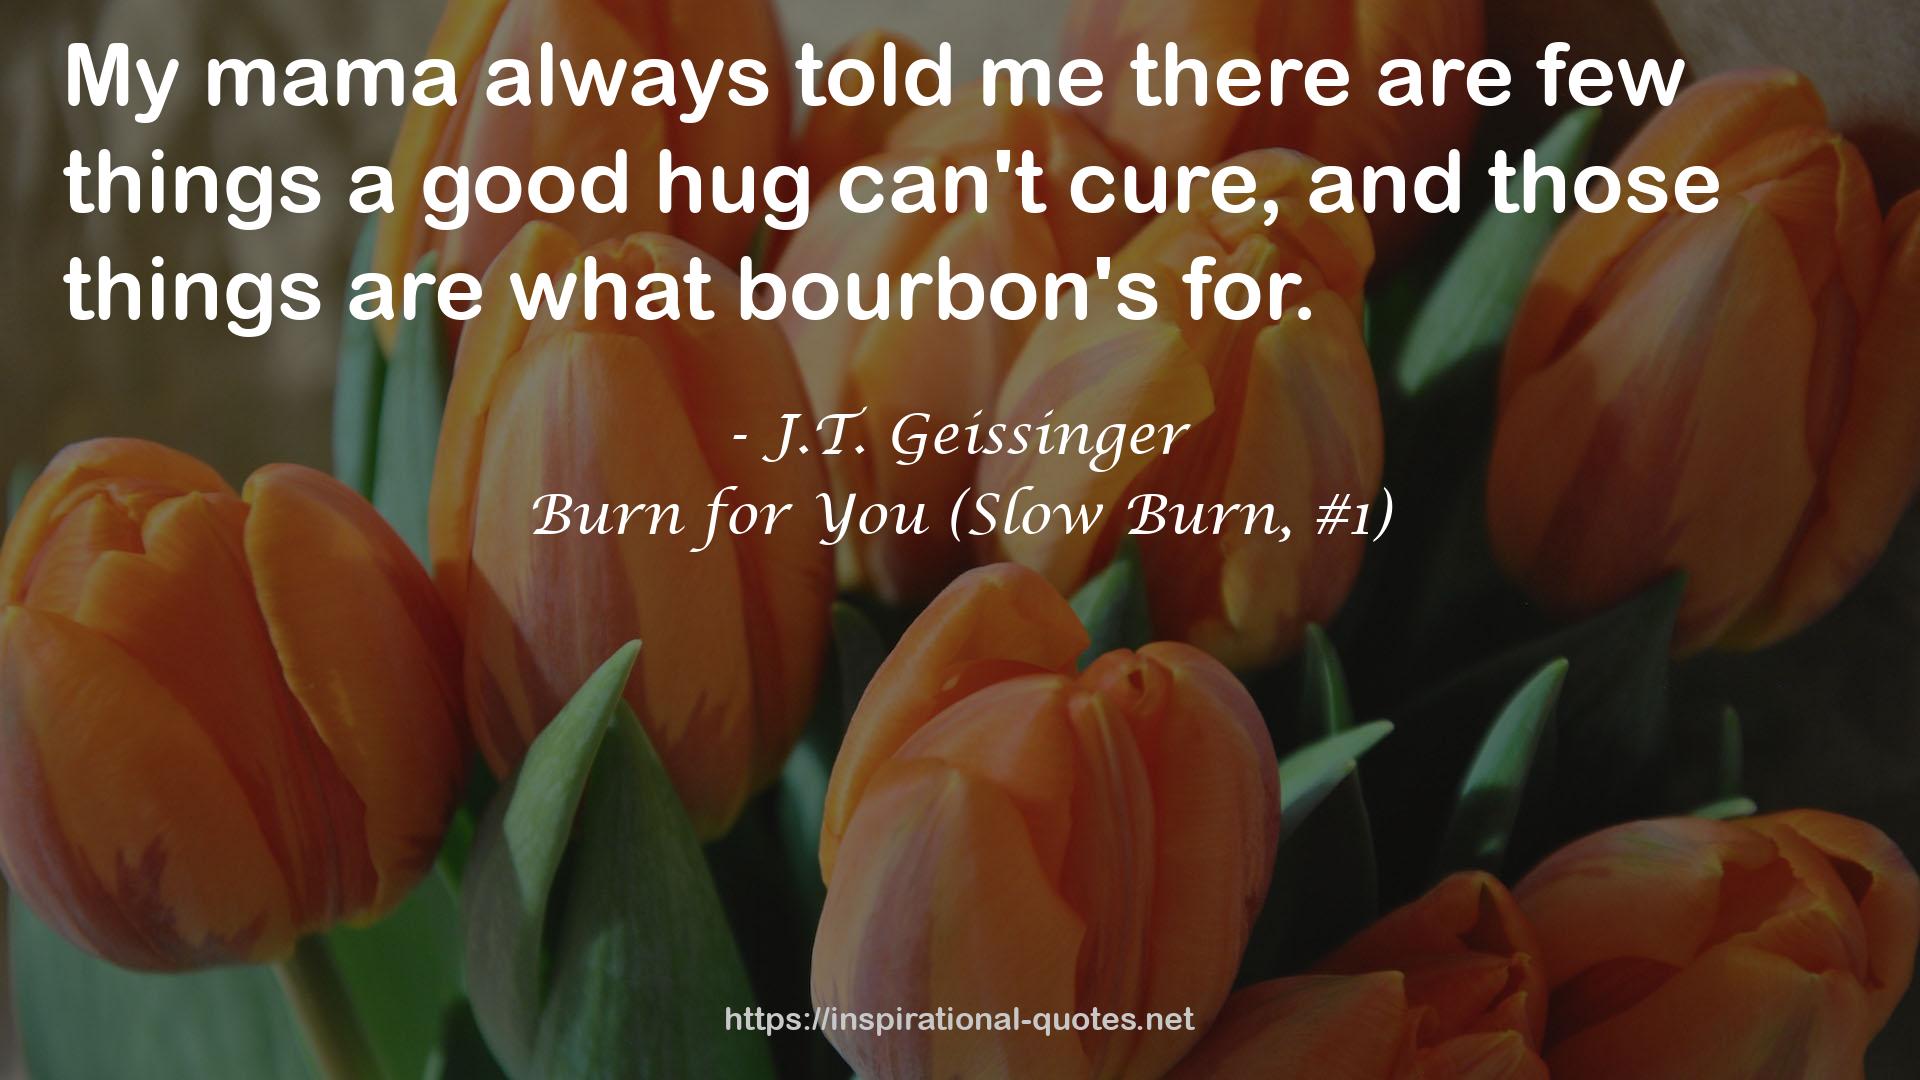 Burn for You (Slow Burn, #1) QUOTES